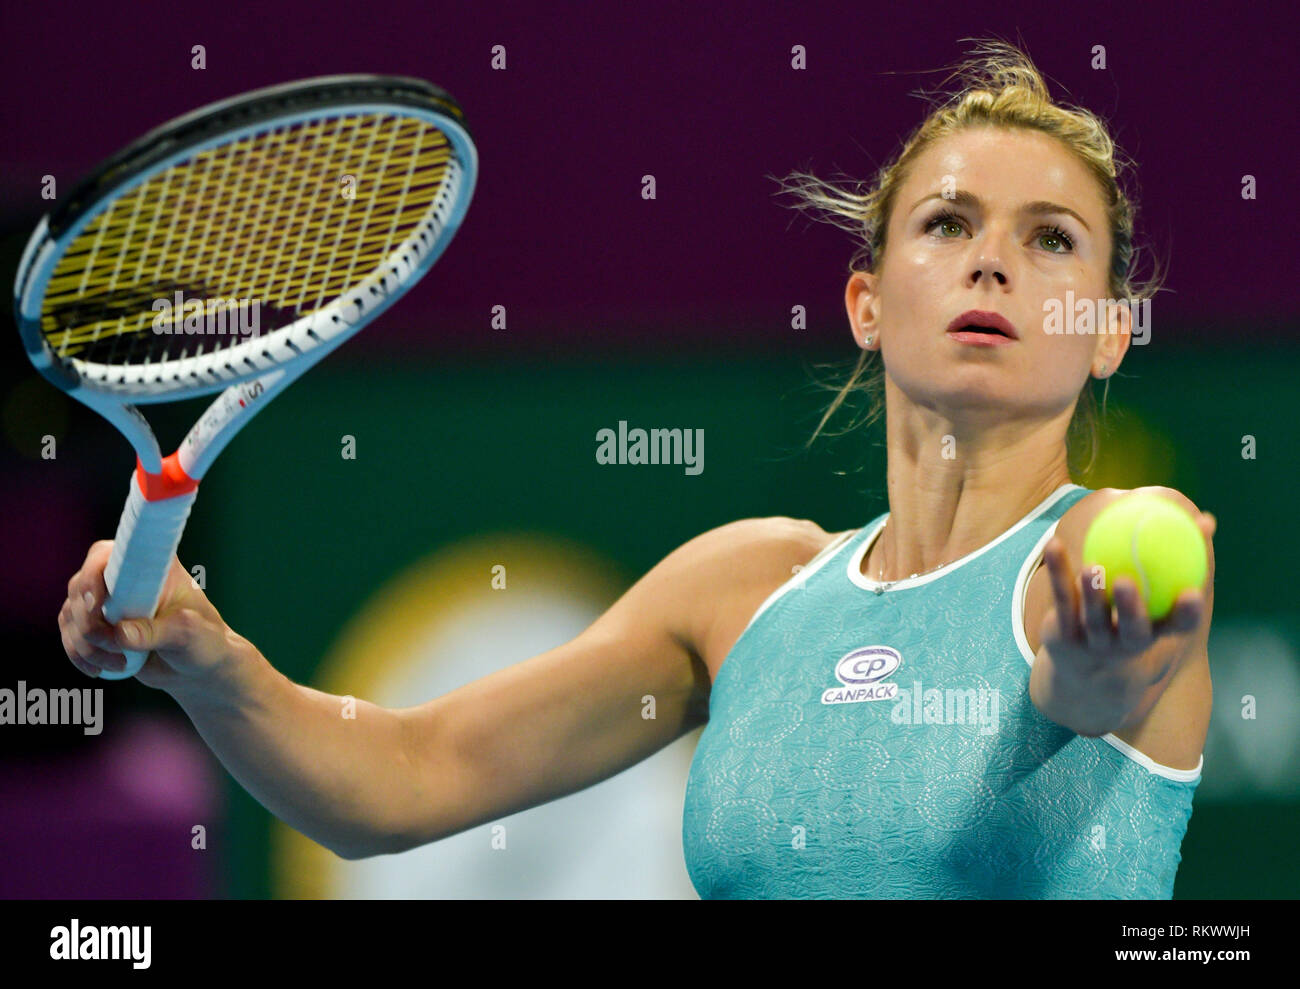 Doha, Qatar. 12th Feb, 2019. Camila Giorgi of Italy serves during the  women's singles first round match between Kiki Bertens of the Netherlands  and Camila Giorgi of Italy at the 2019 WTA